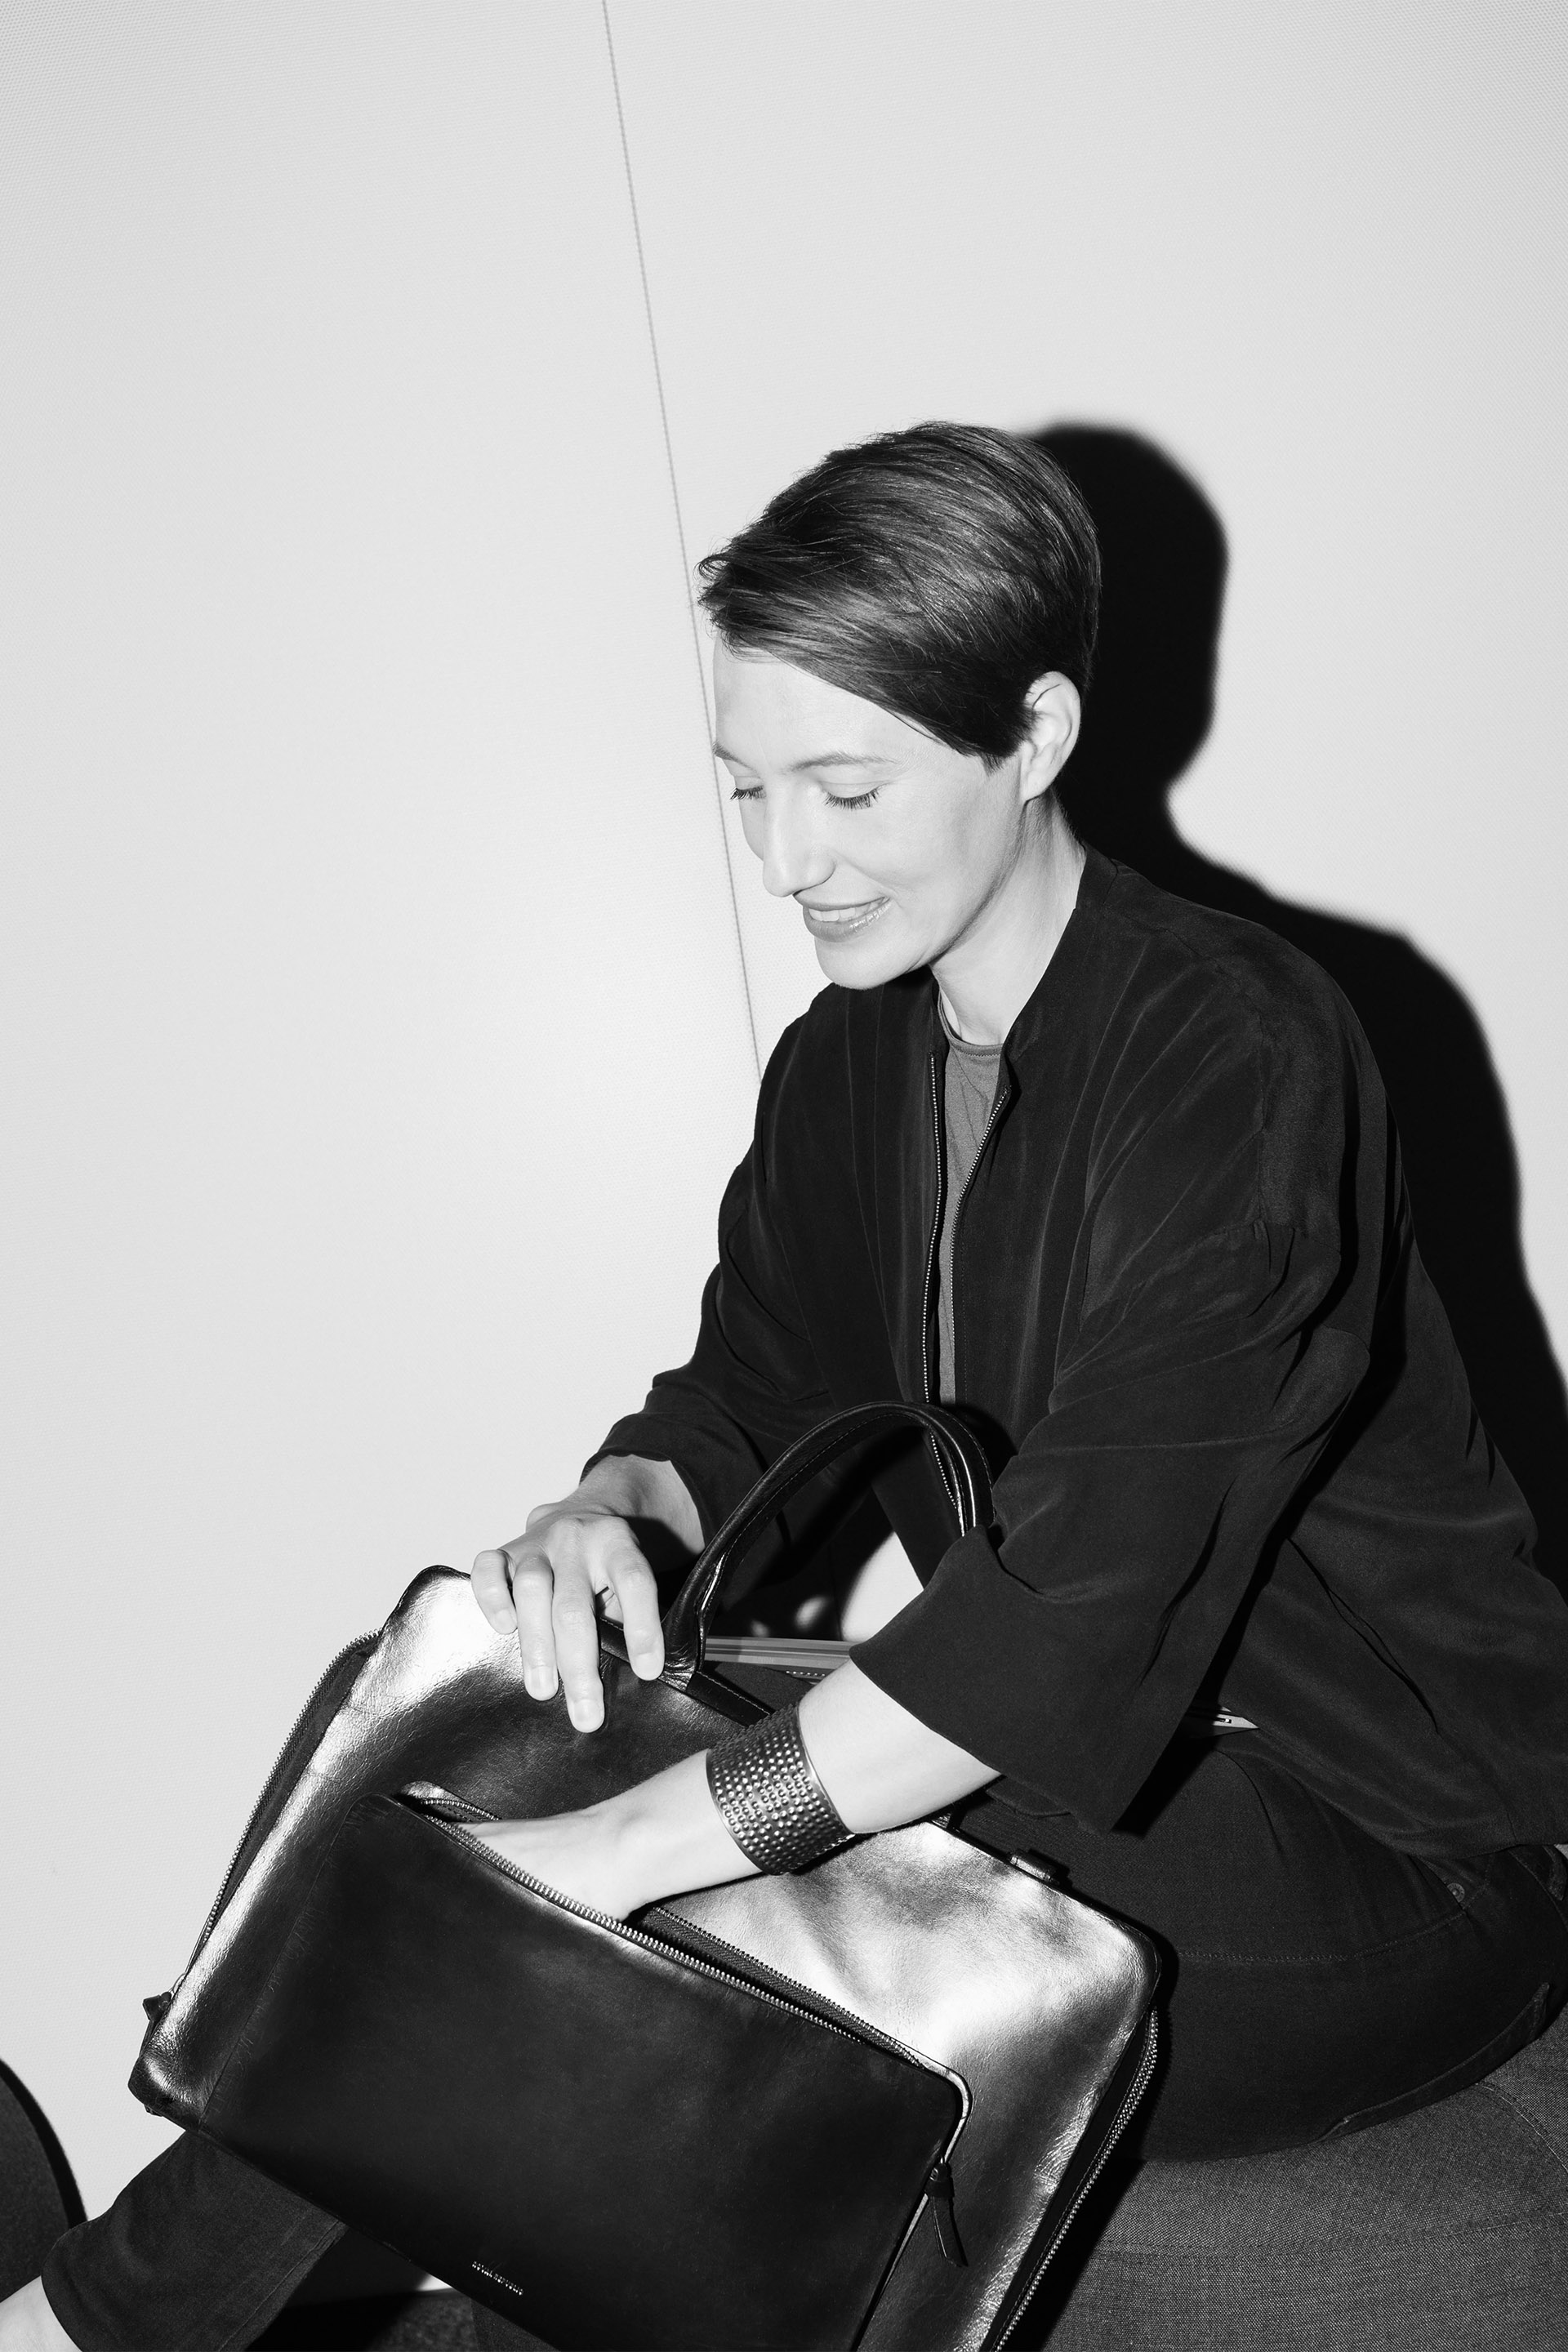 Annegret Maier sits on a chair and reaches into a bag with a smile.